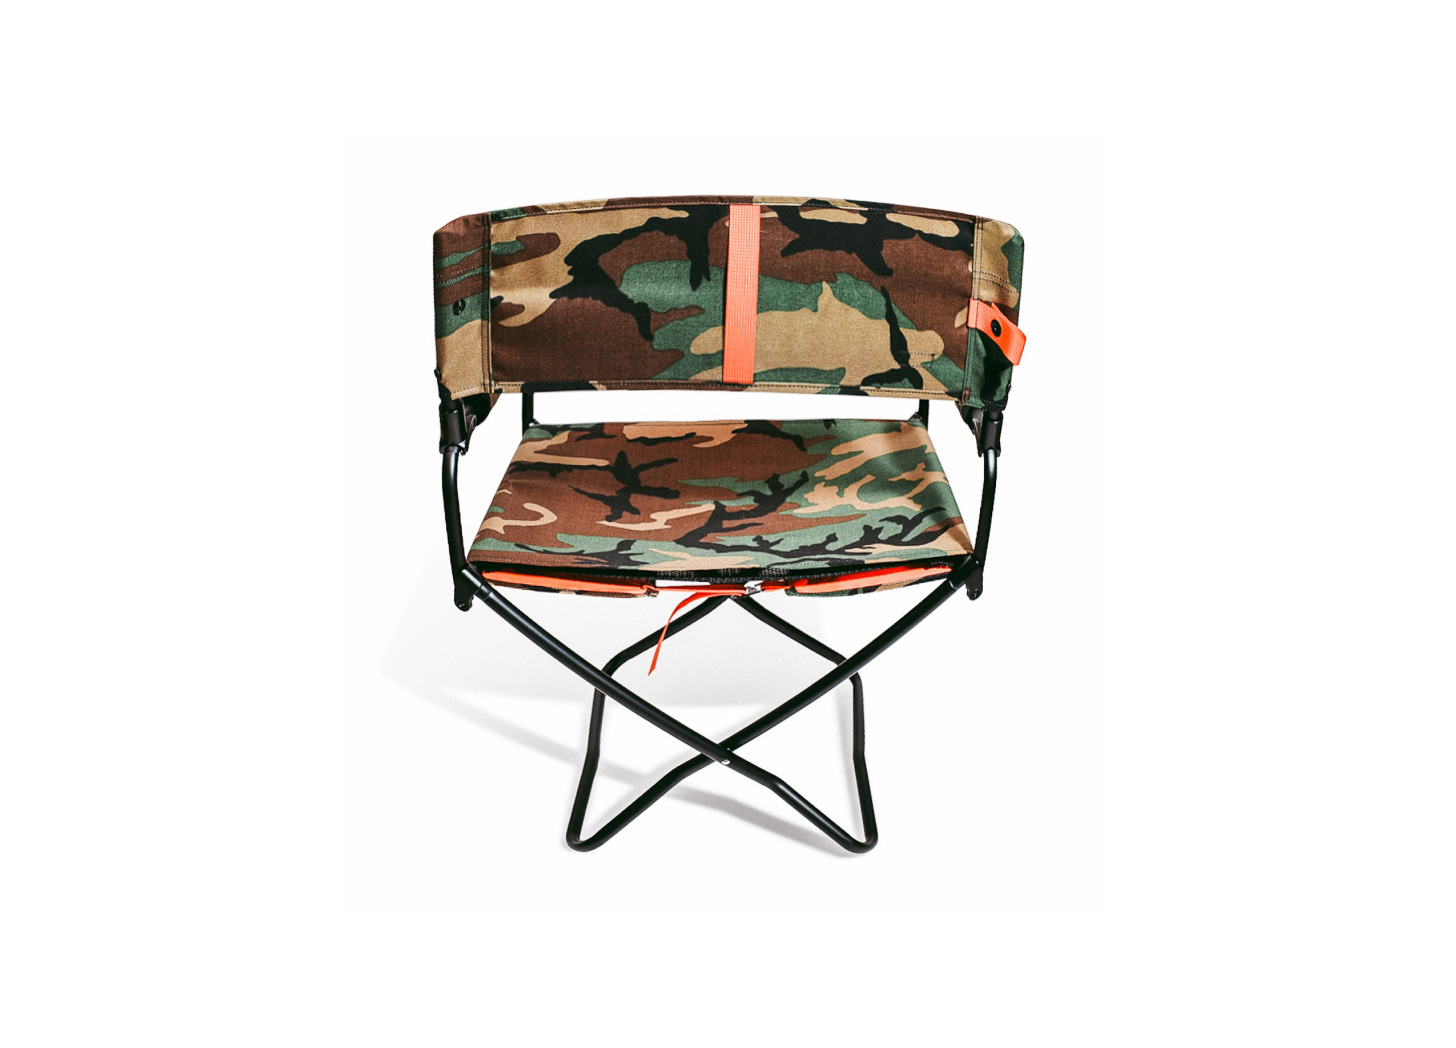 Special Projects: Snow Peak Camping Chair